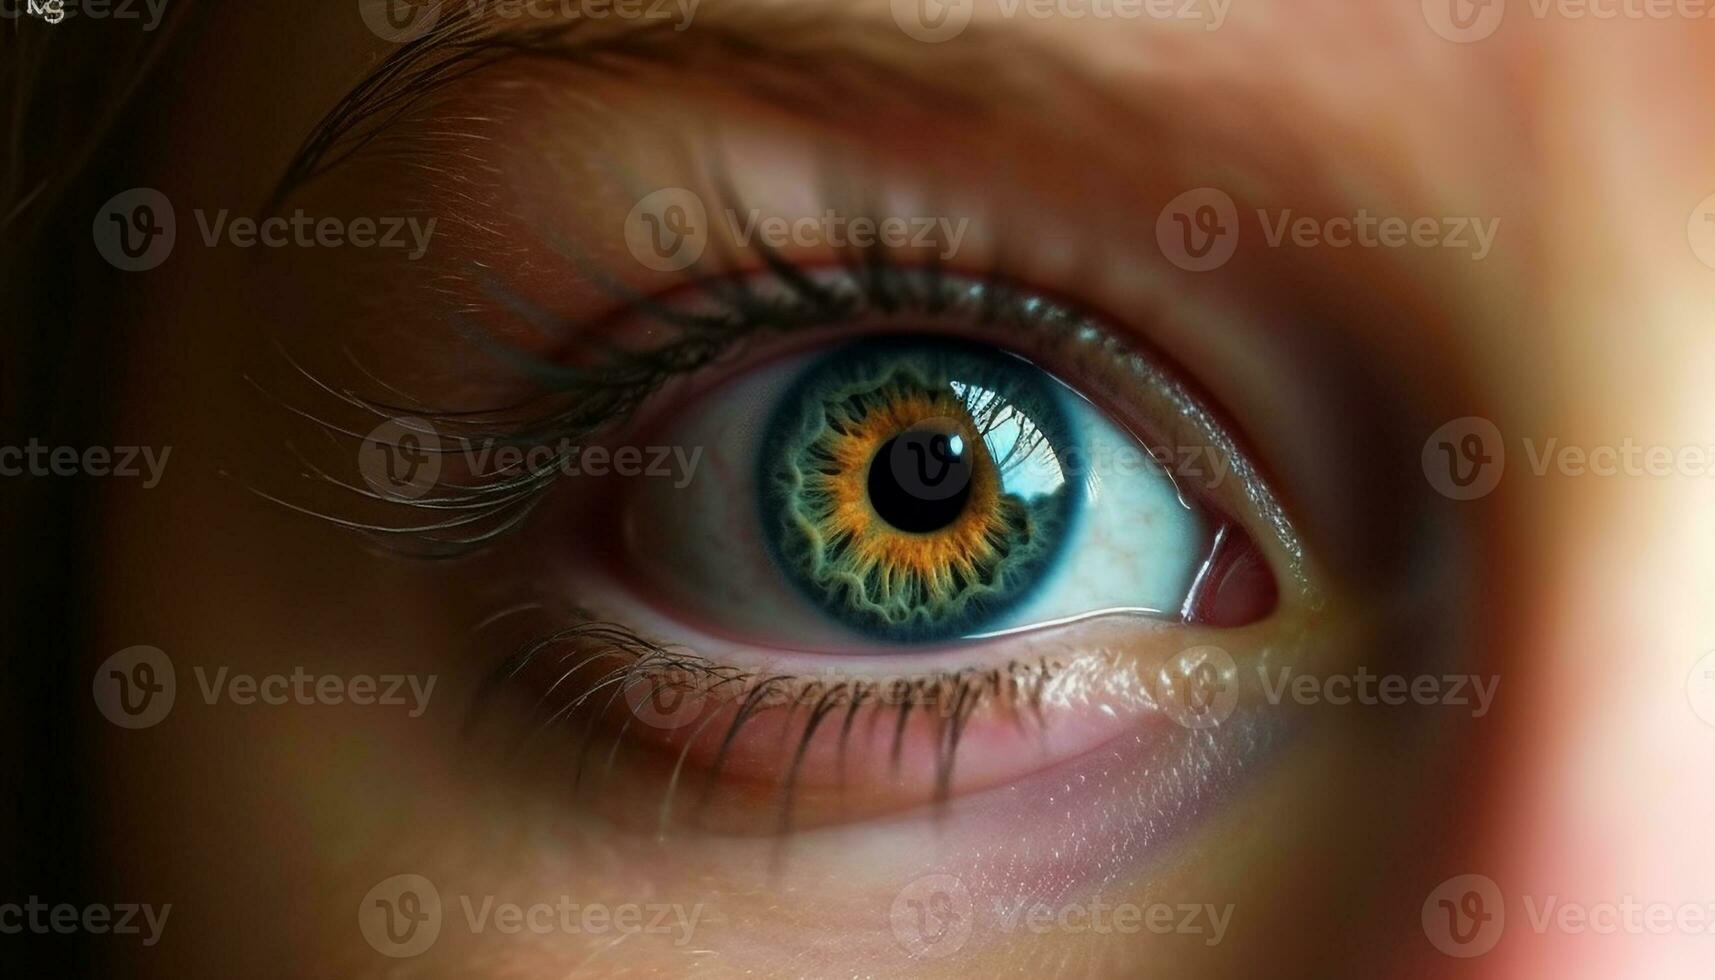 Caucasian woman green iris staring at camera in close up portrait generated by AI photo